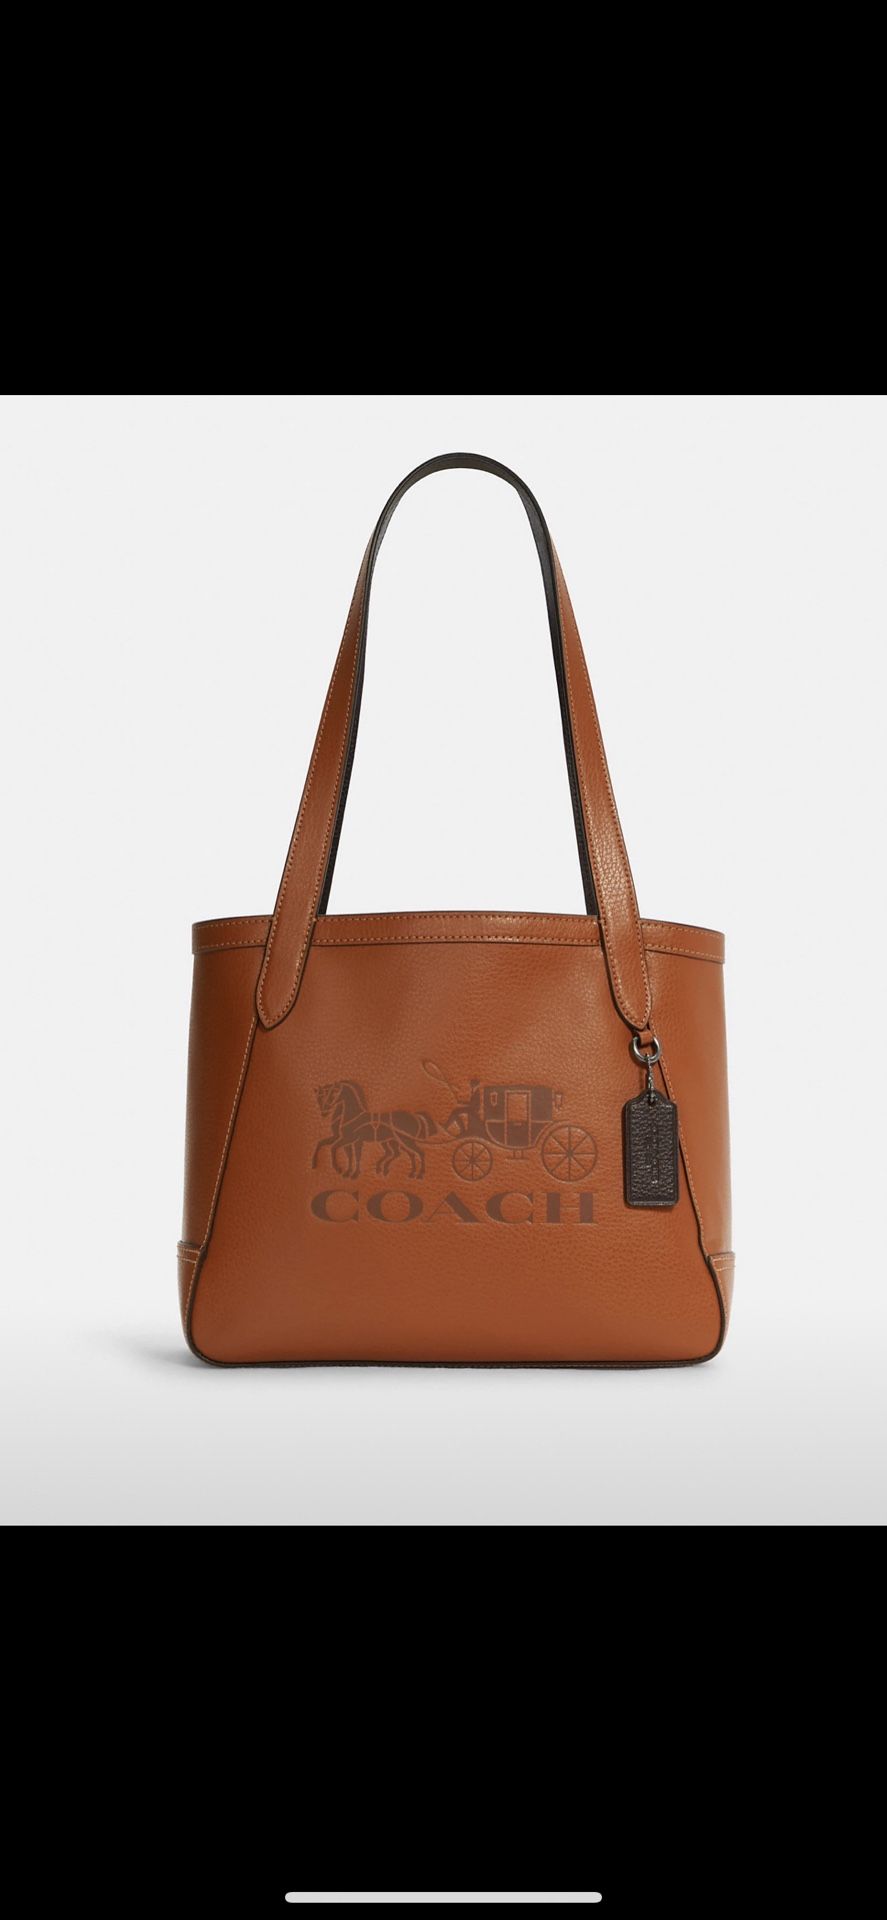 NWT COACH TOTE 27 WITH HORSE AND CARRIGE GINGER LEATHER SHOULDER BAG C4062 